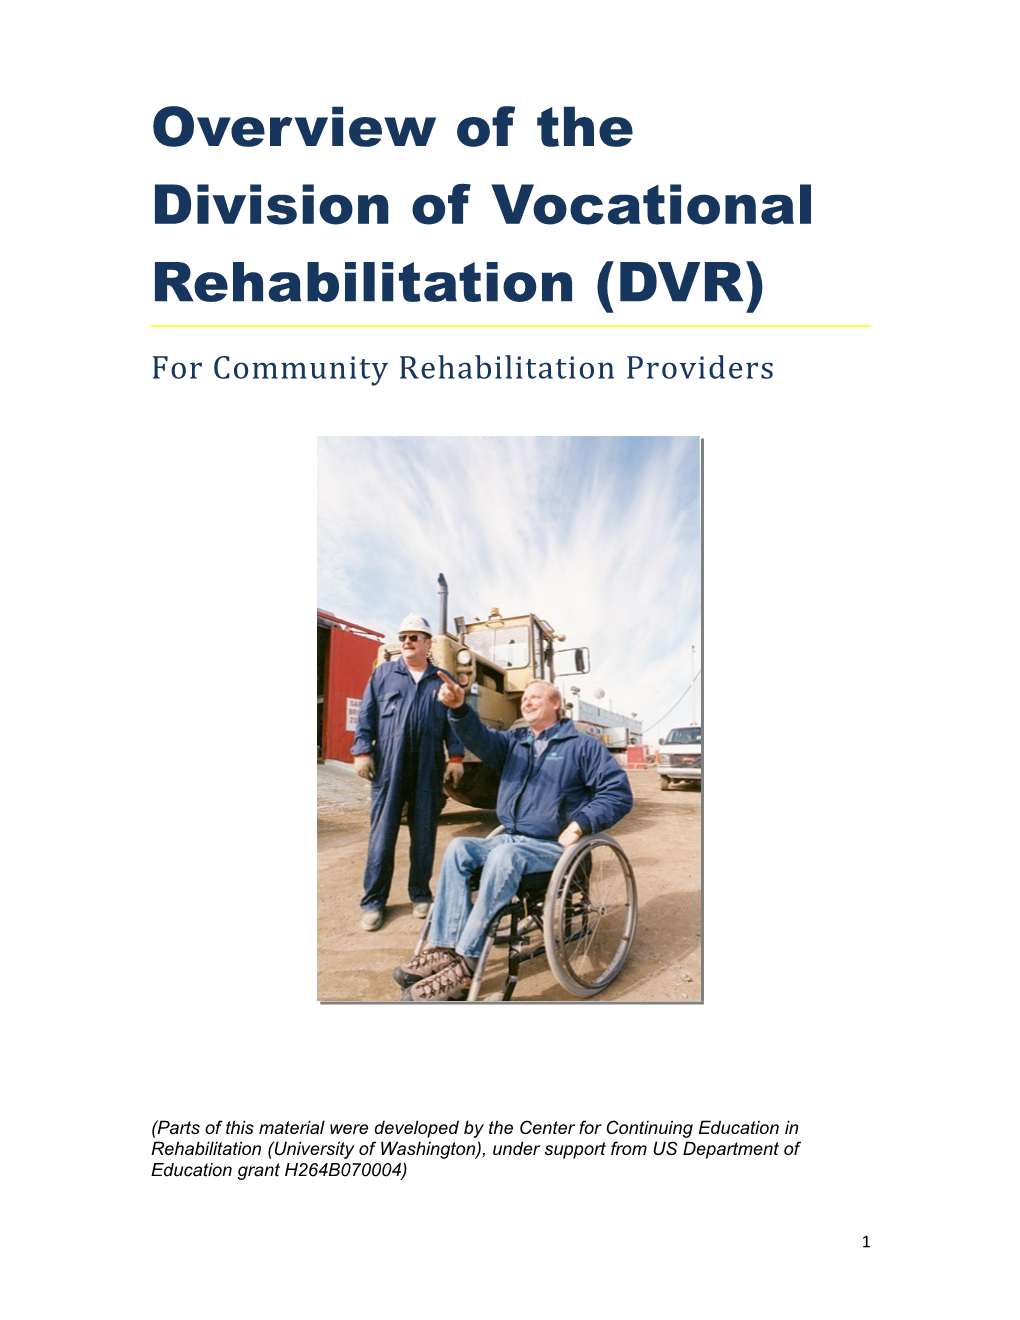 Overview of the Division of Vocational Rehabilitation (DVR)